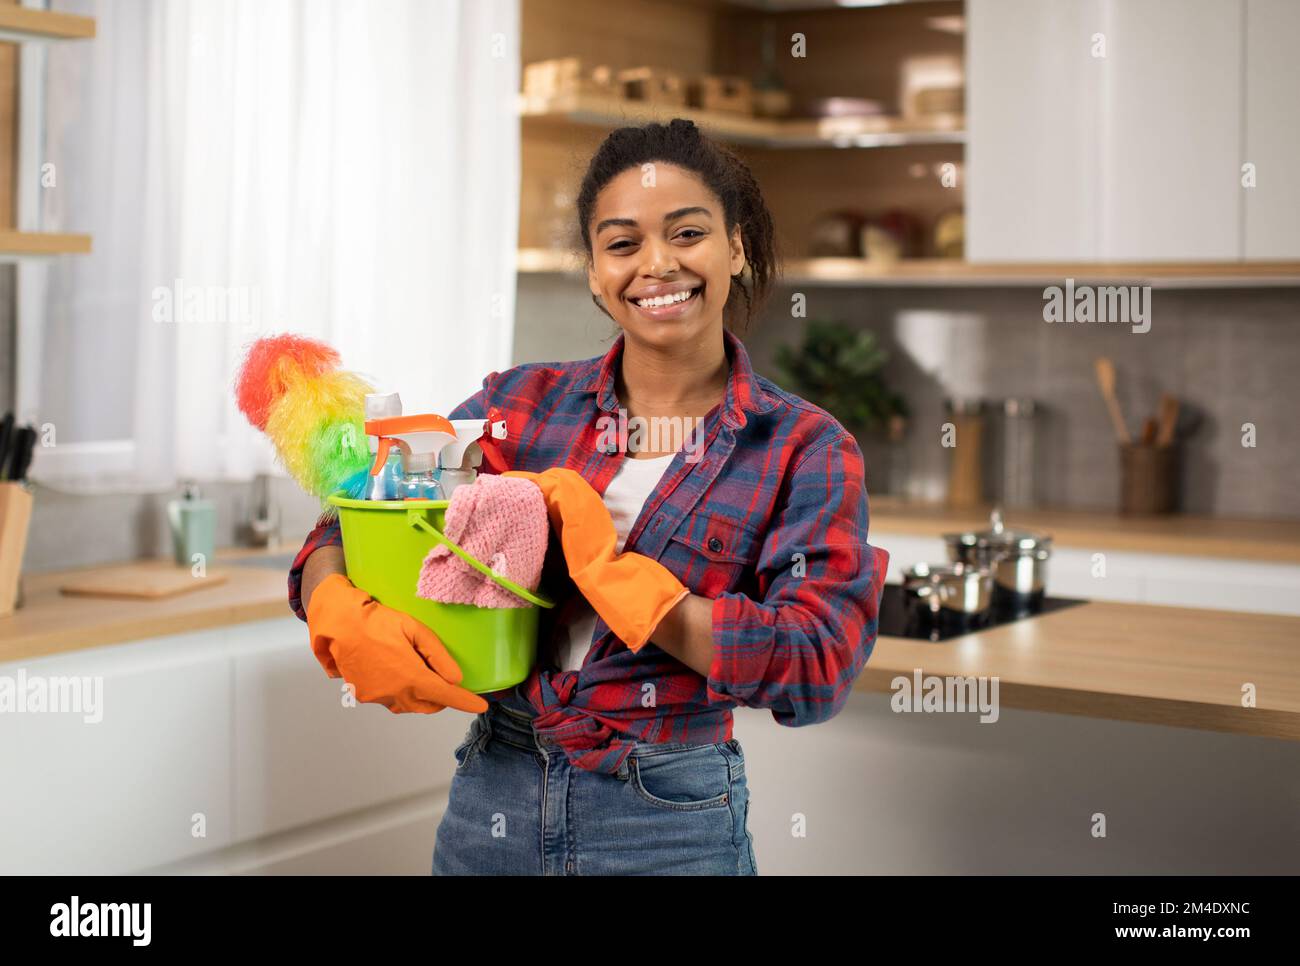 https://c8.alamy.com/comp/2M4DXNC/cheerful-millennial-african-american-female-in-rubber-gloves-with-cleaning-supplies-bucket-enjoys-household-chores-2M4DXNC.jpg